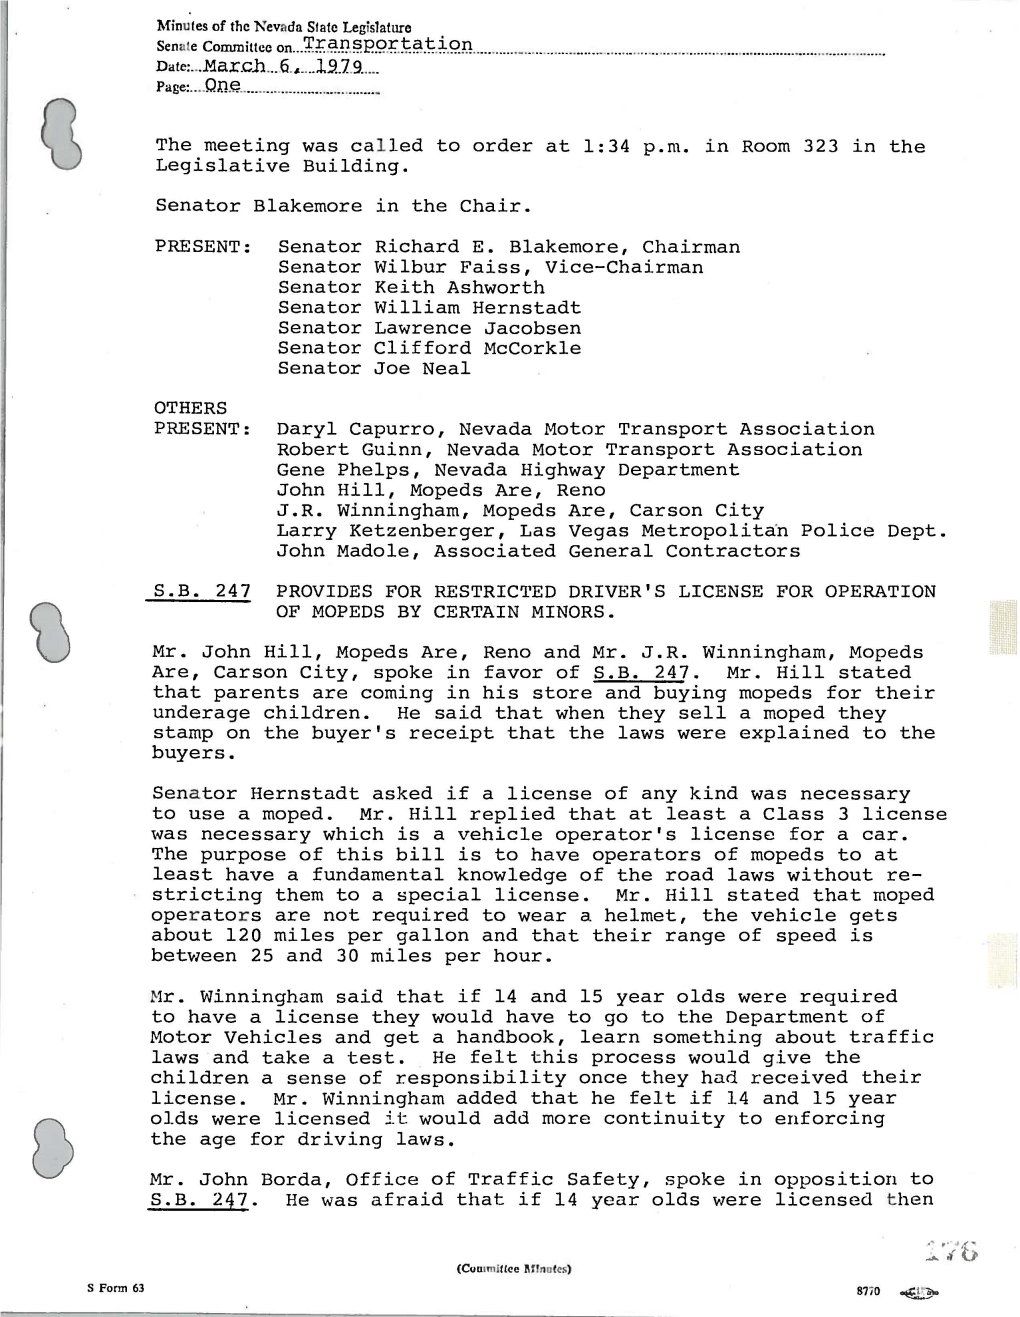 Minutes of the Senate Committee on Transportation, 3-6-1979